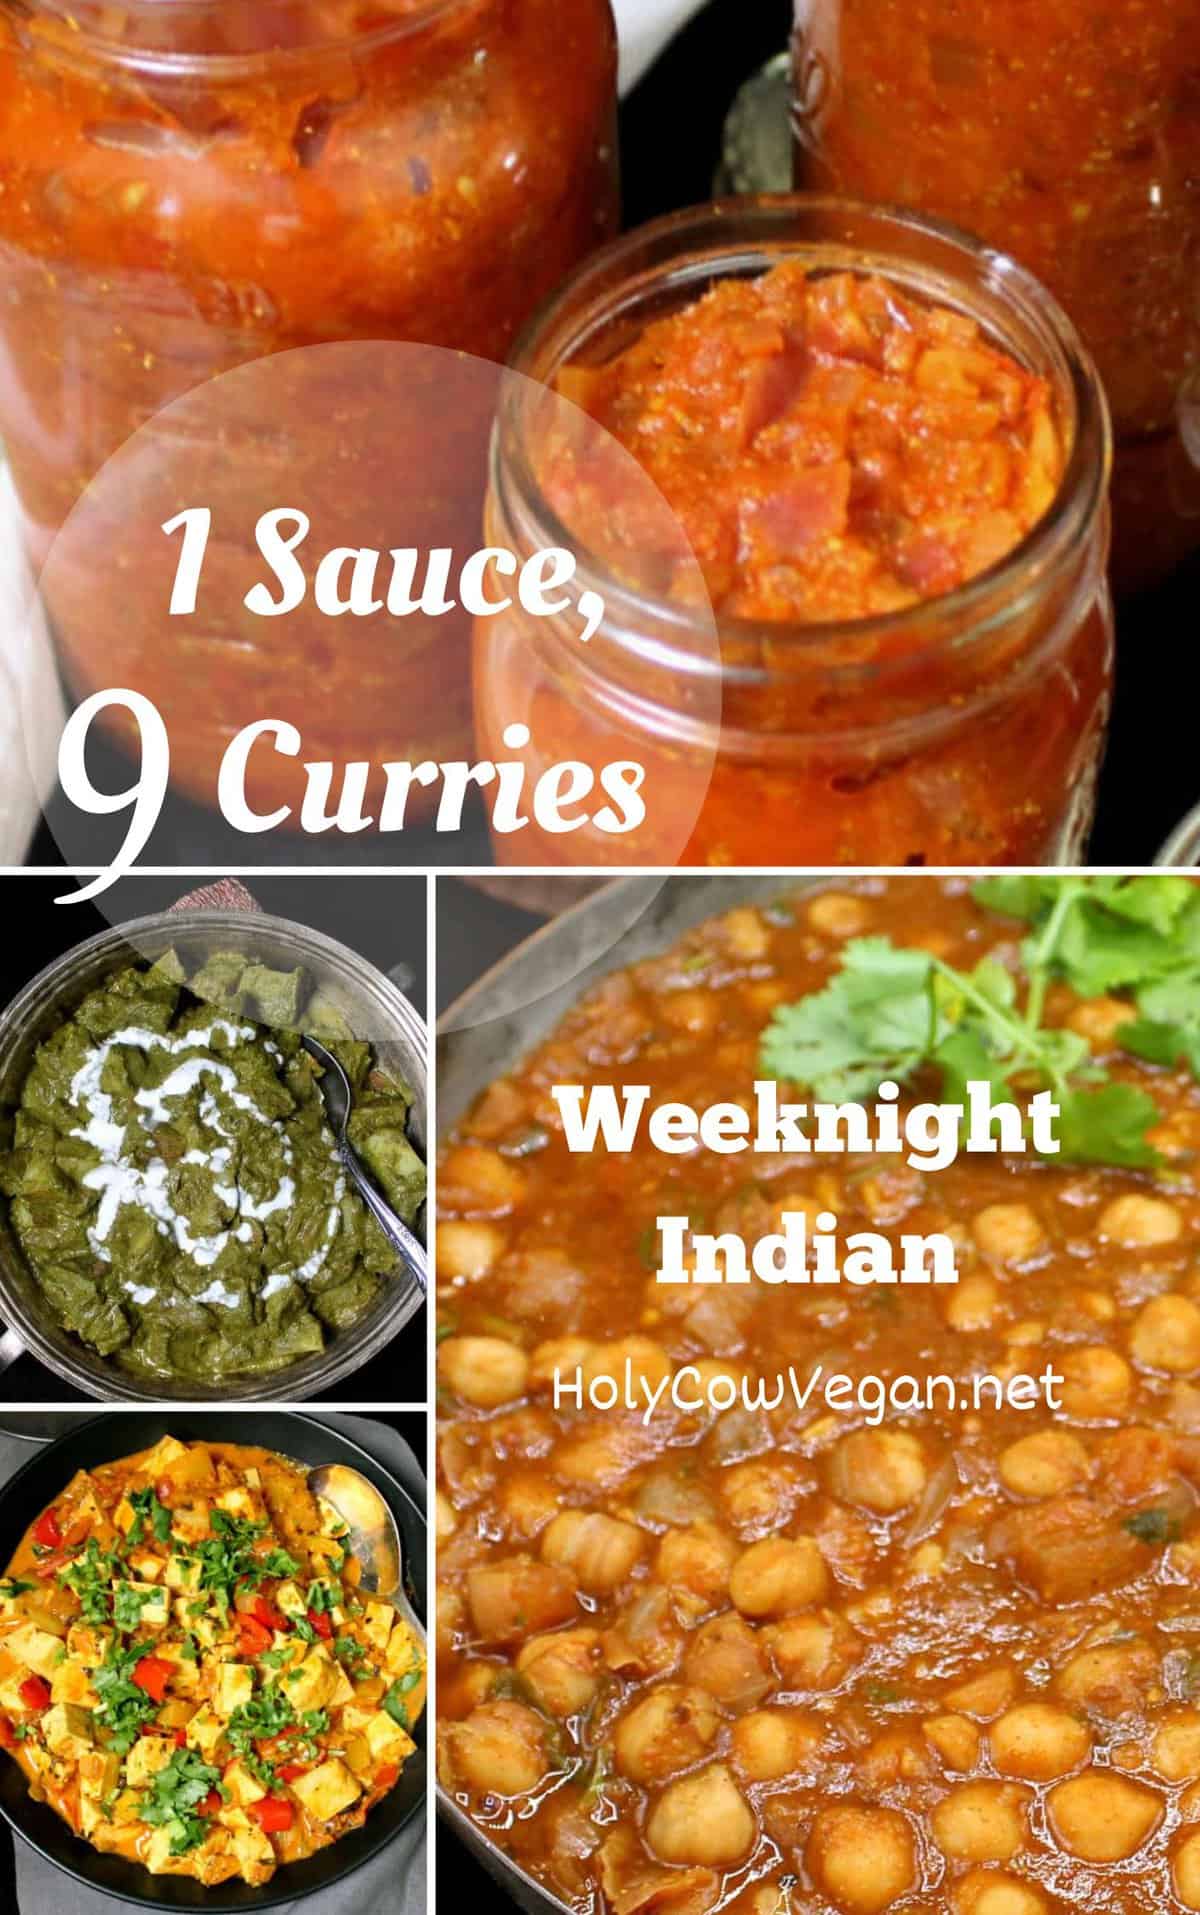 Images of tomato onion sauce, paneer masala, aloo palak and chana masala with text that says "1 sauce, 9 curries, weeknight Indian."